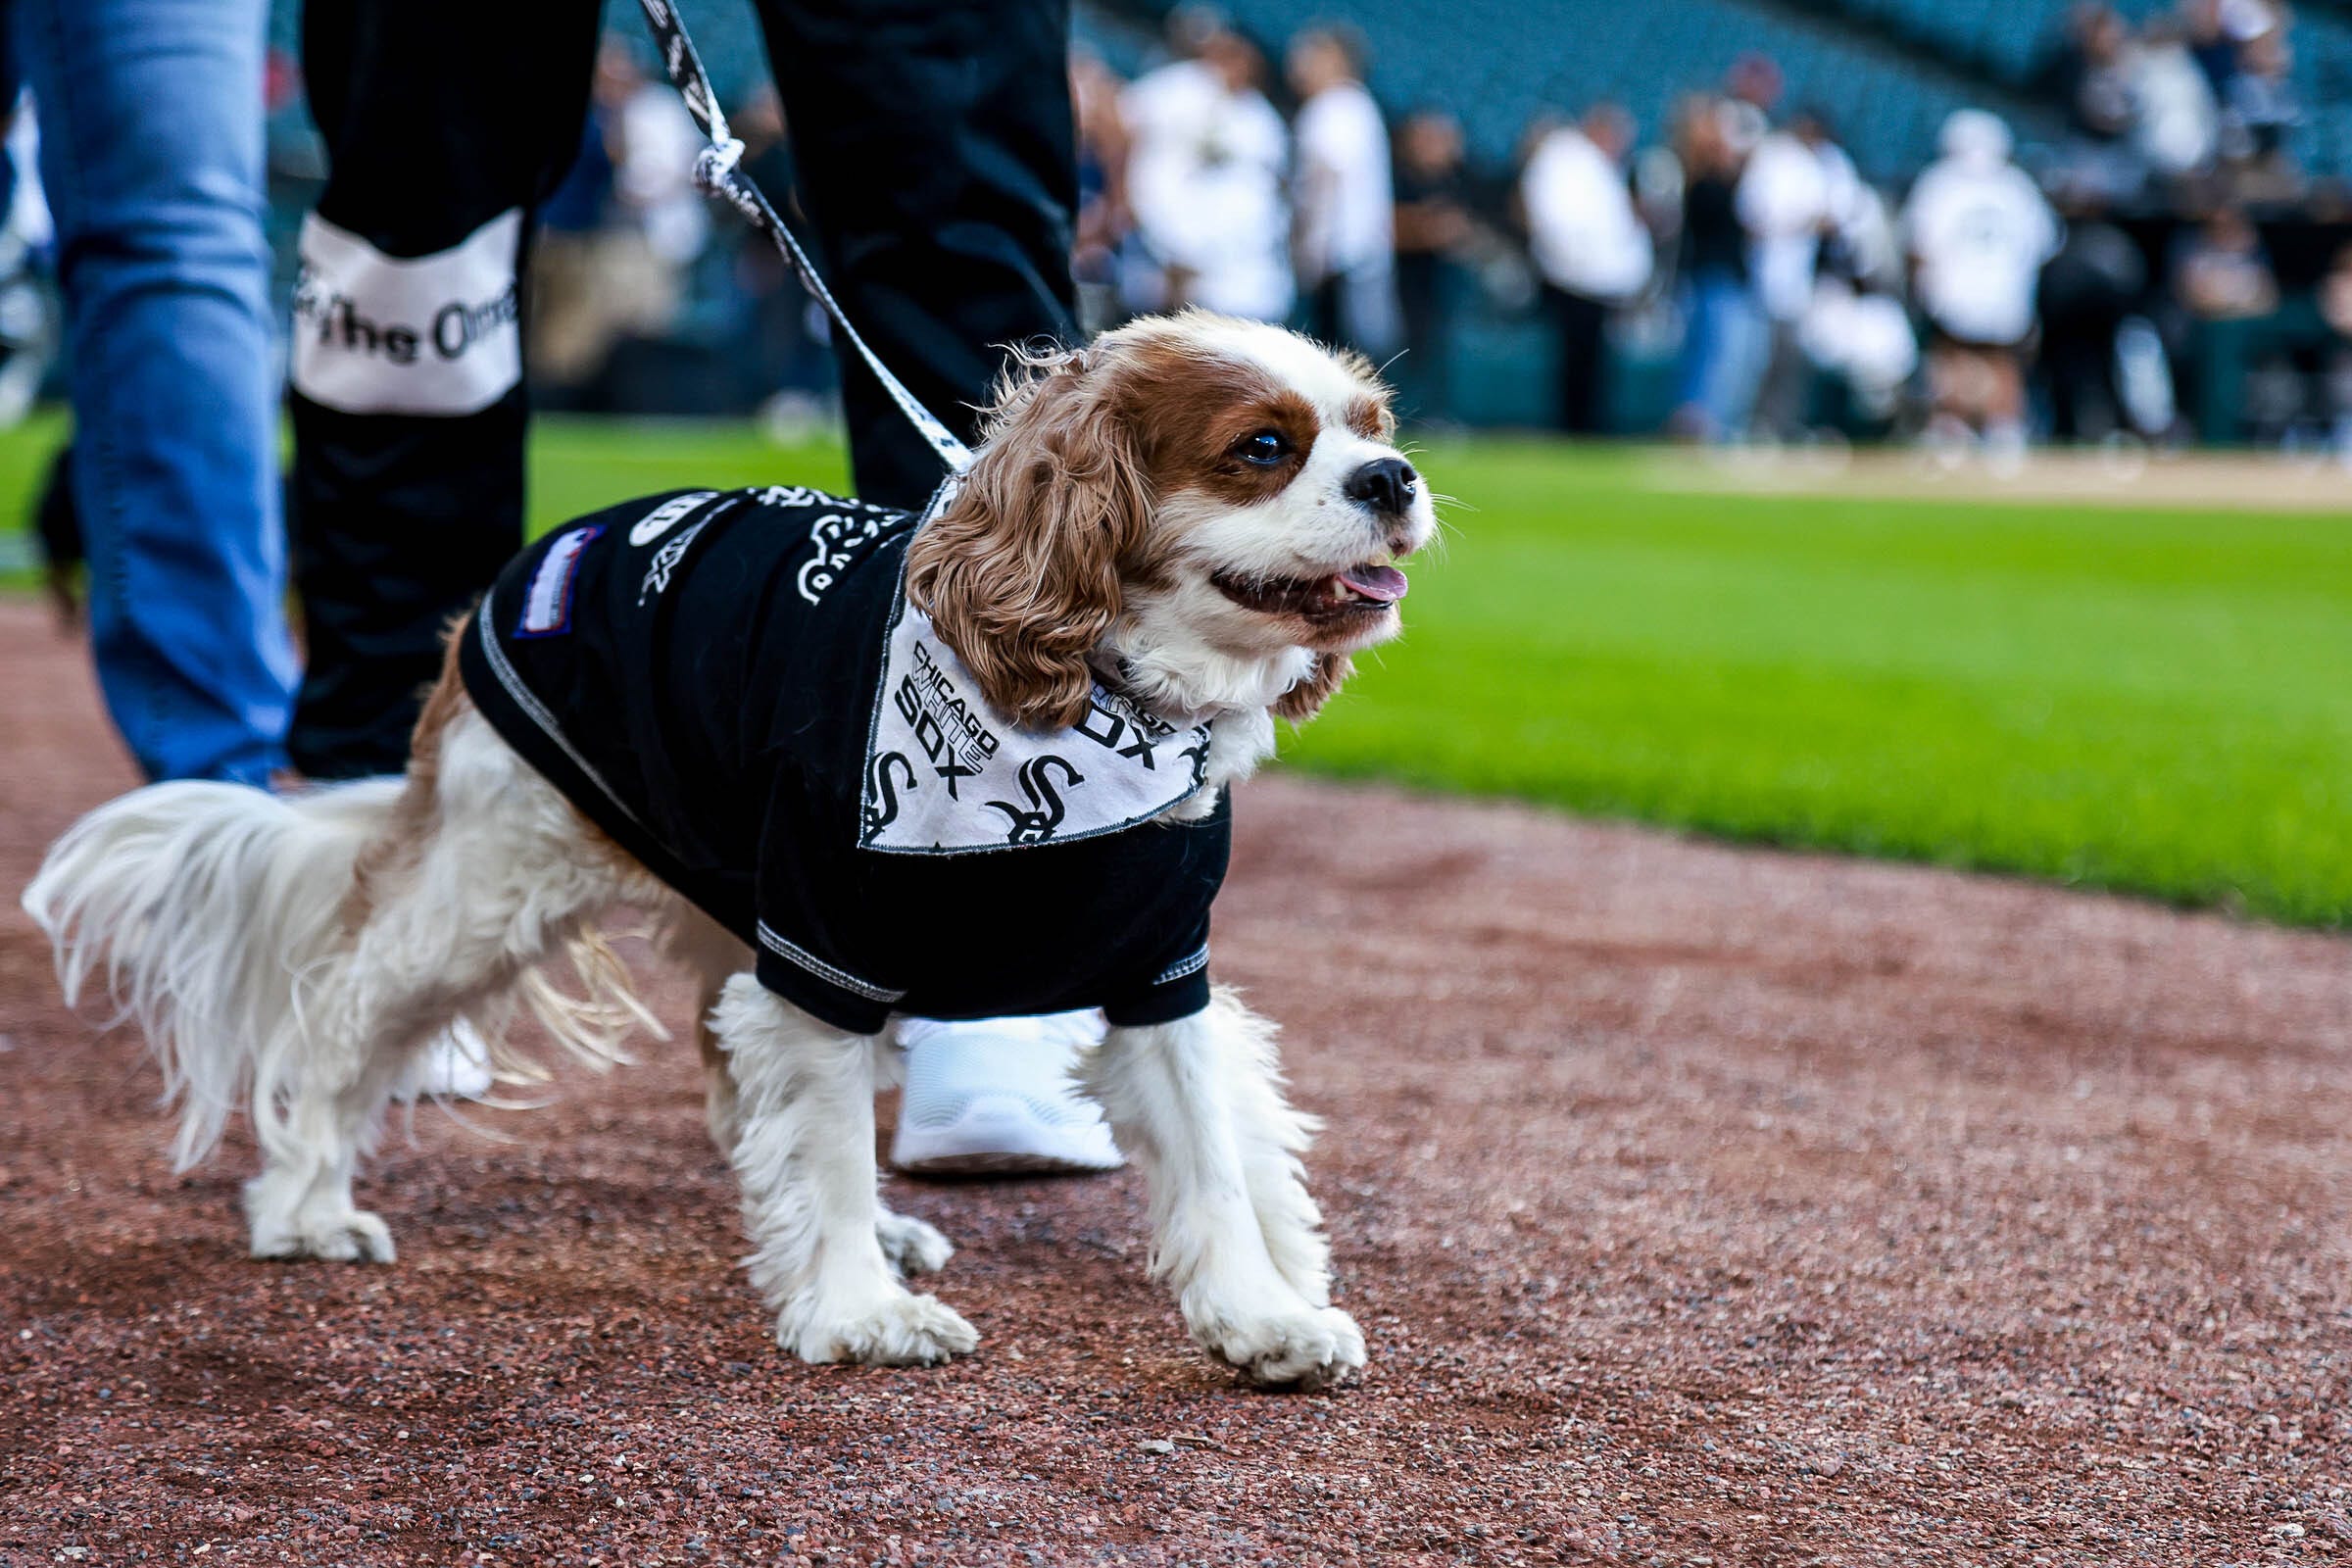 Dog Day is Back. - Inside the White Sox